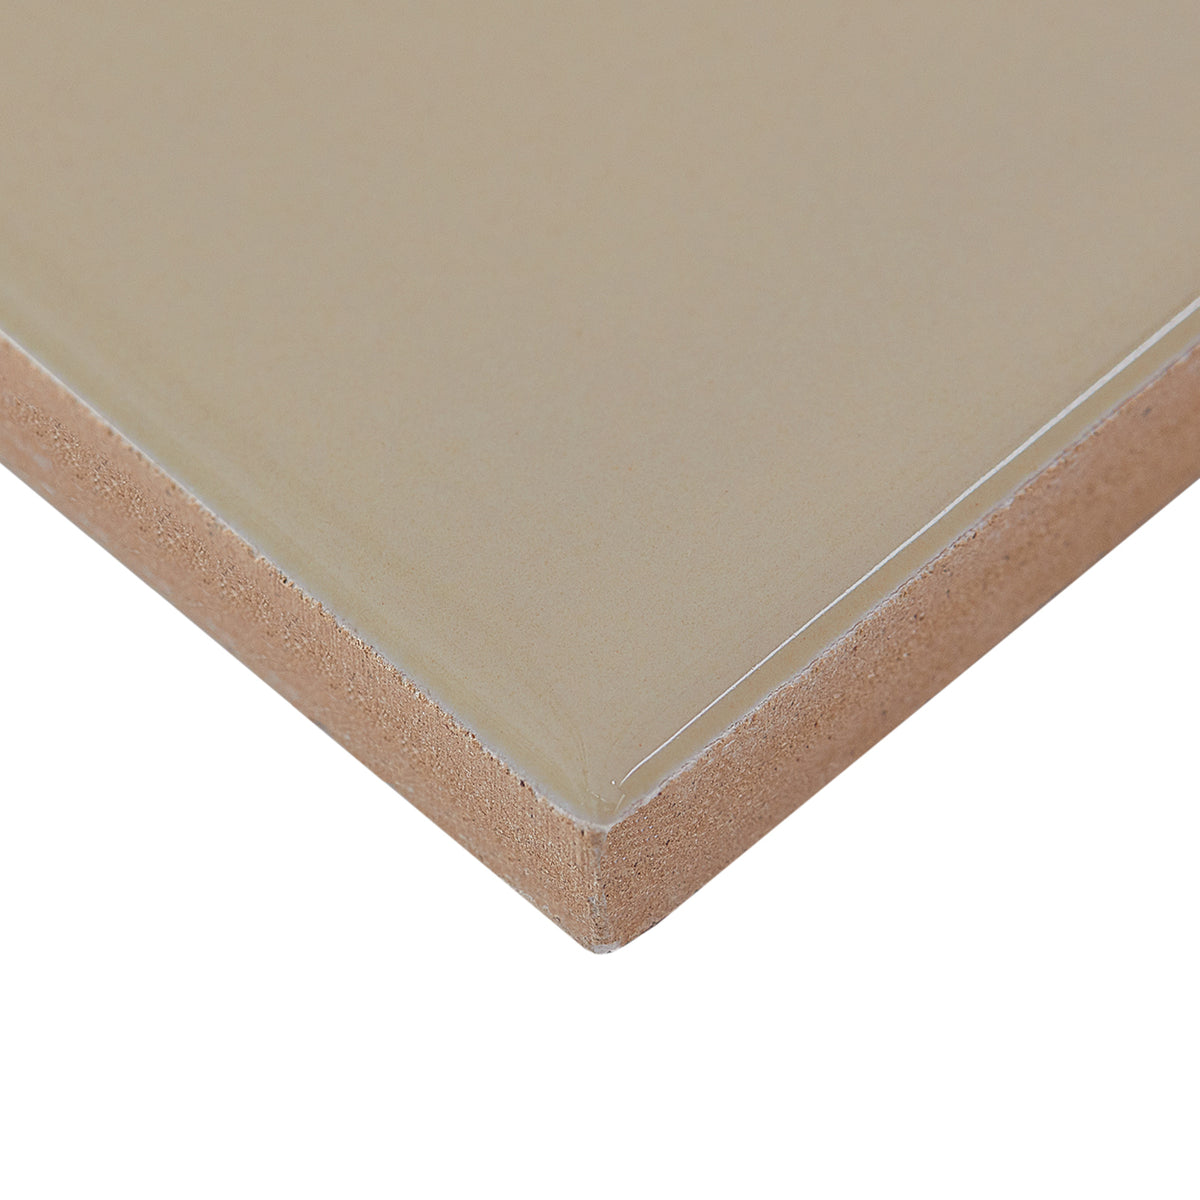 CommodiTile - Carrollton 4 in. x 12 in. Wall Tile - Sand Gloss